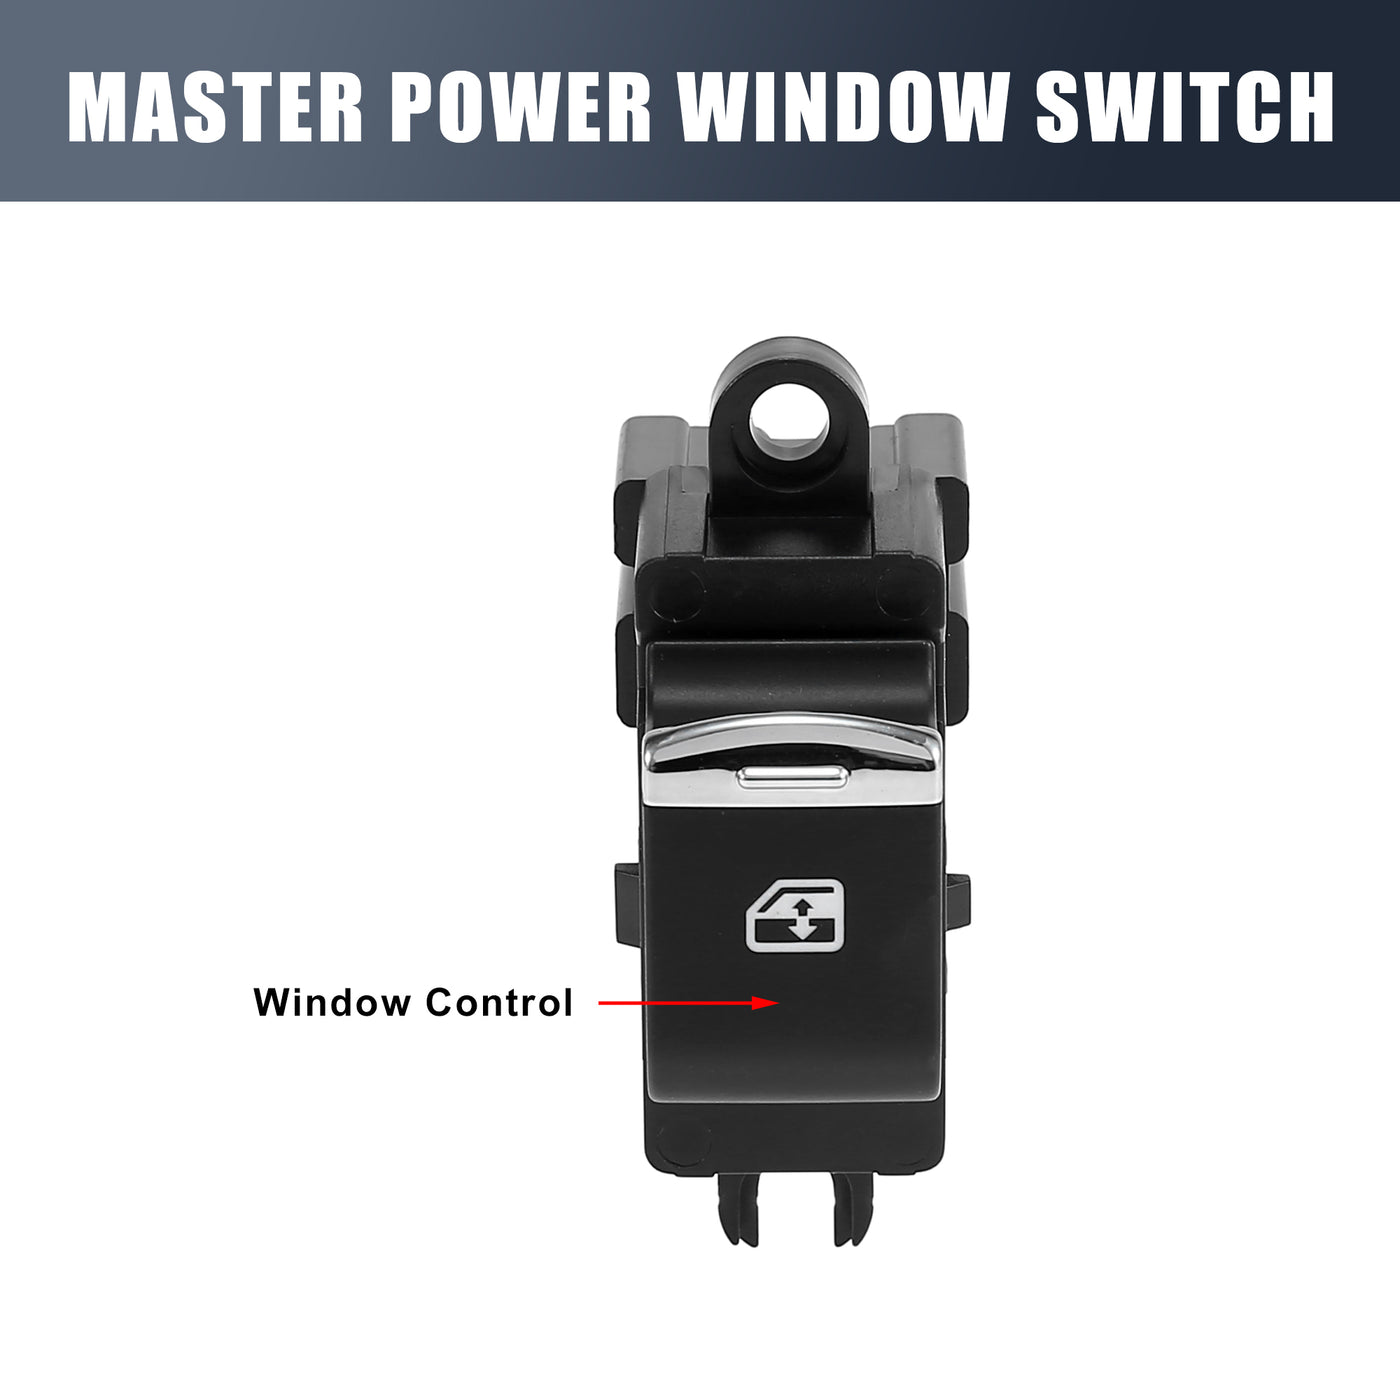 X AUTOHAUX Power Window Switch for Nissan Pathfinder 2002-2004 Front Passenger Side